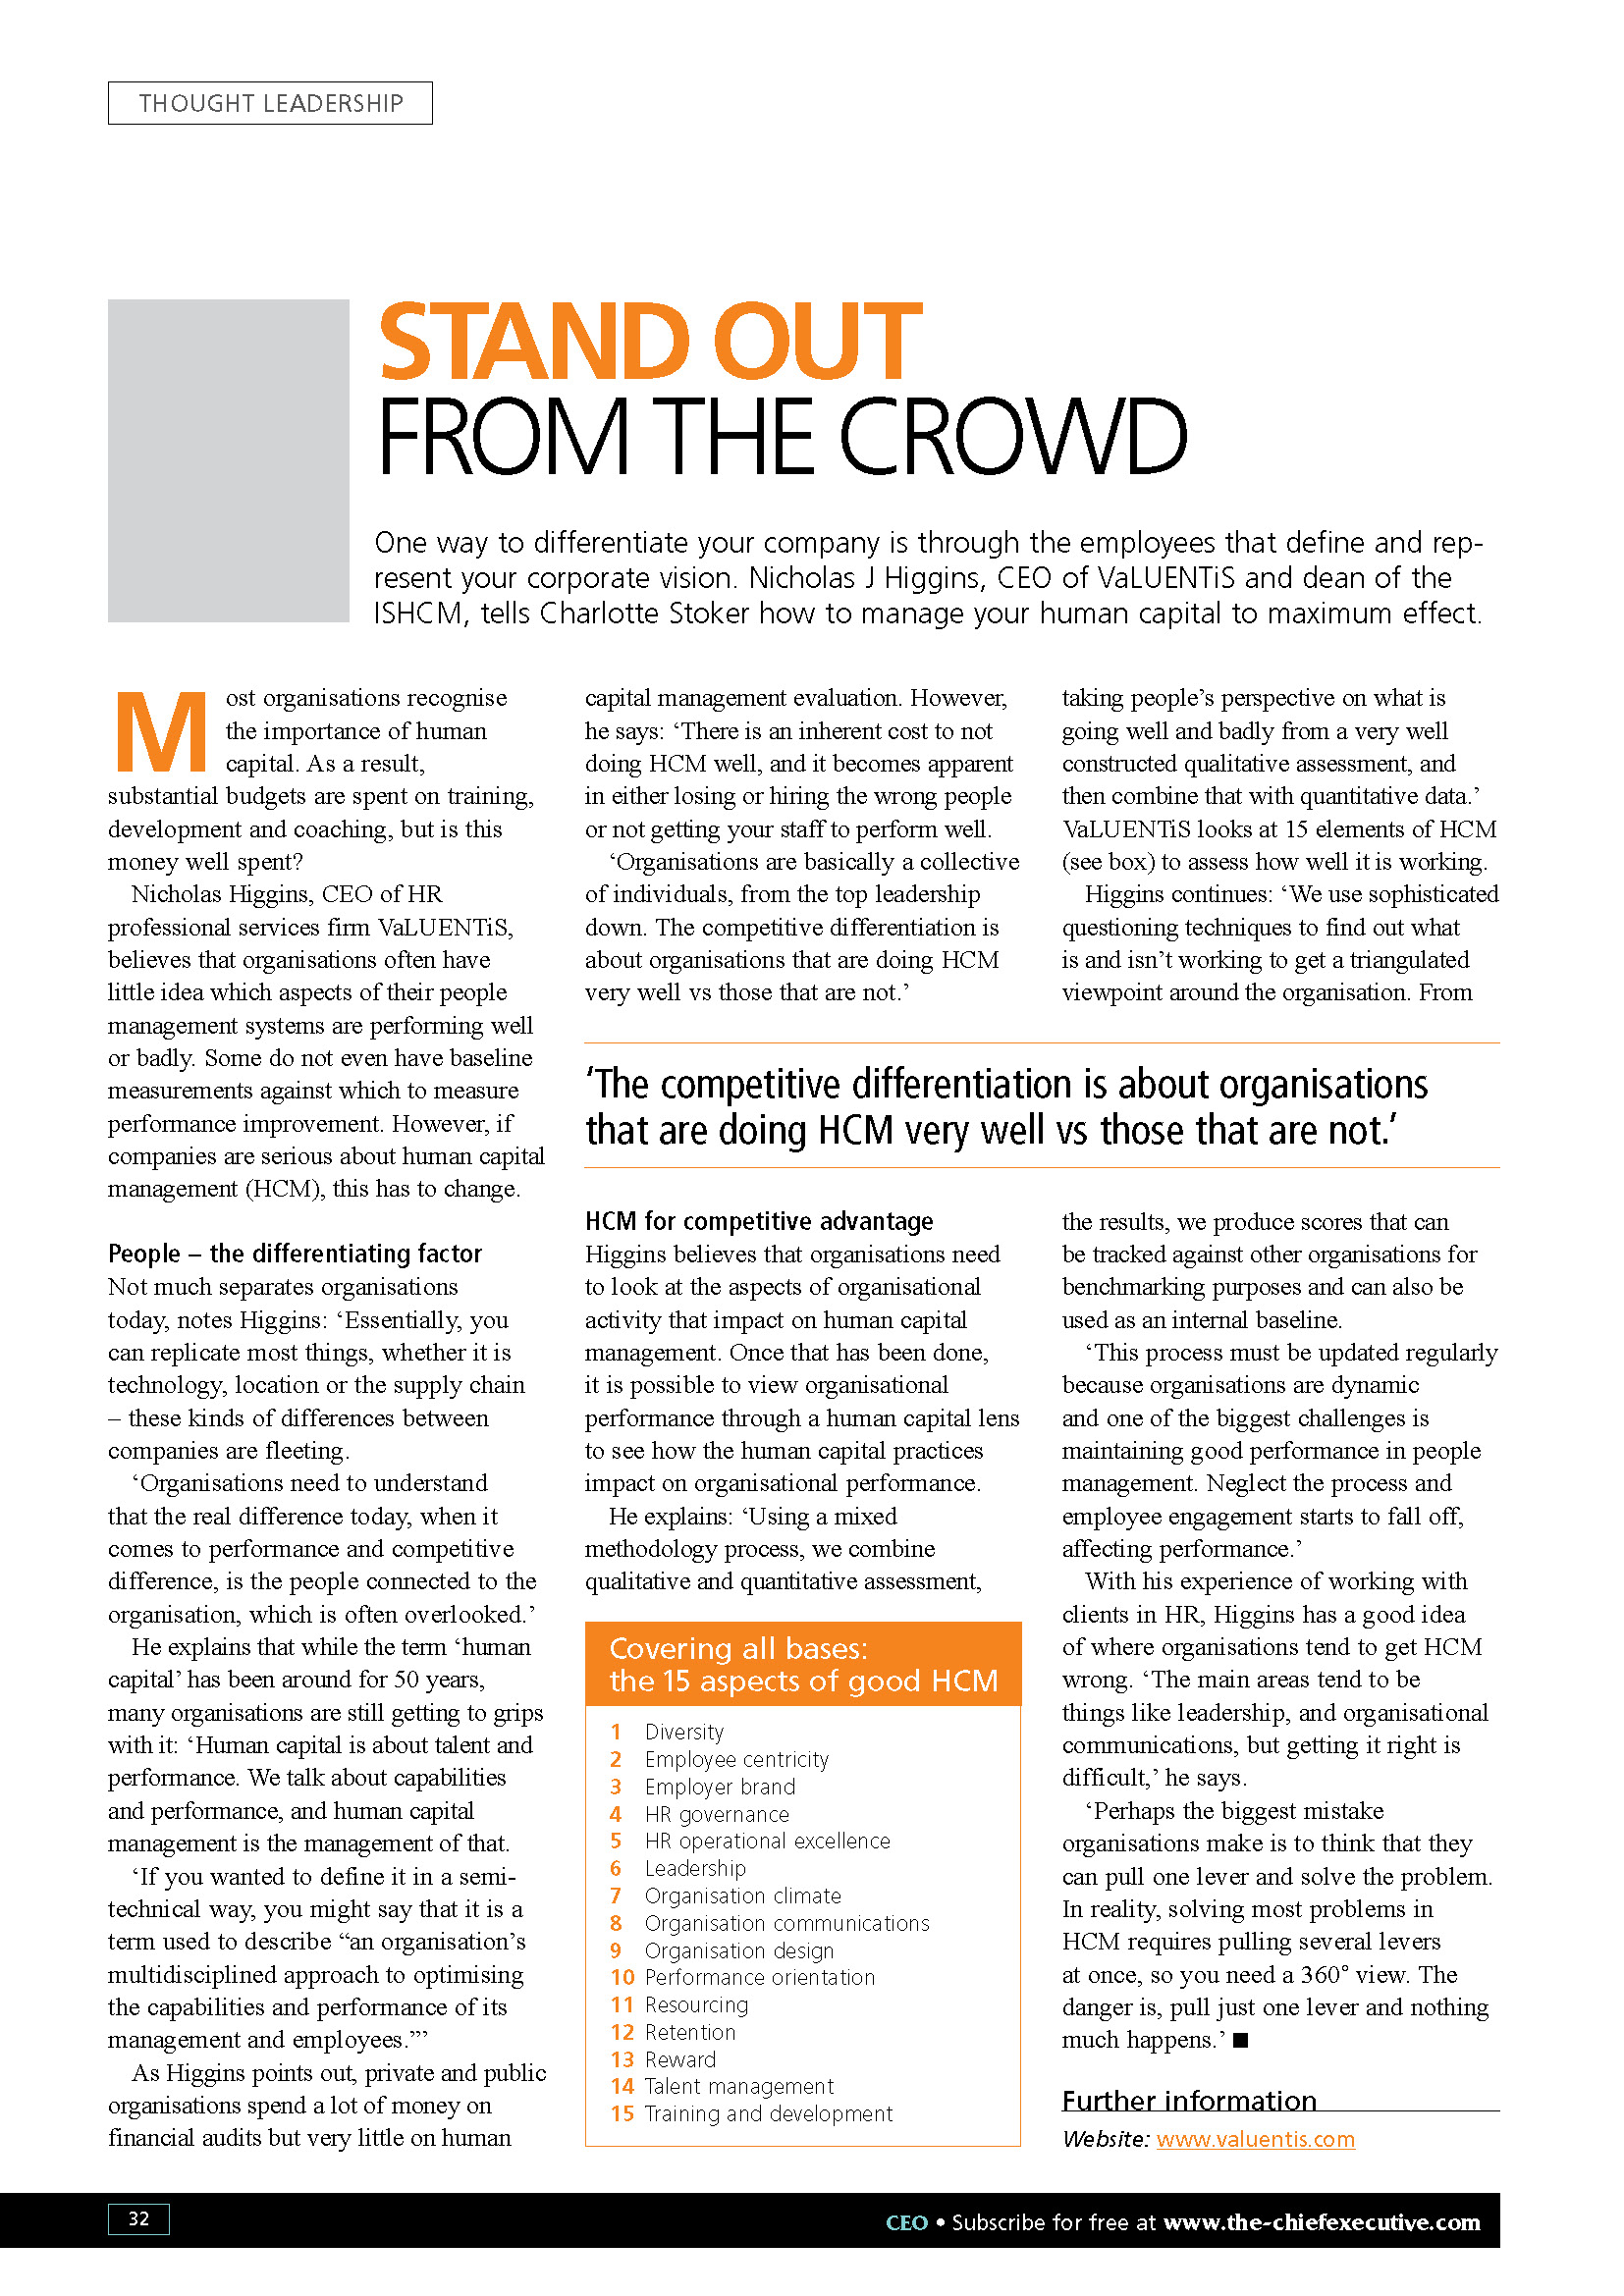 CEO Journal - Stand Out from the Crowd